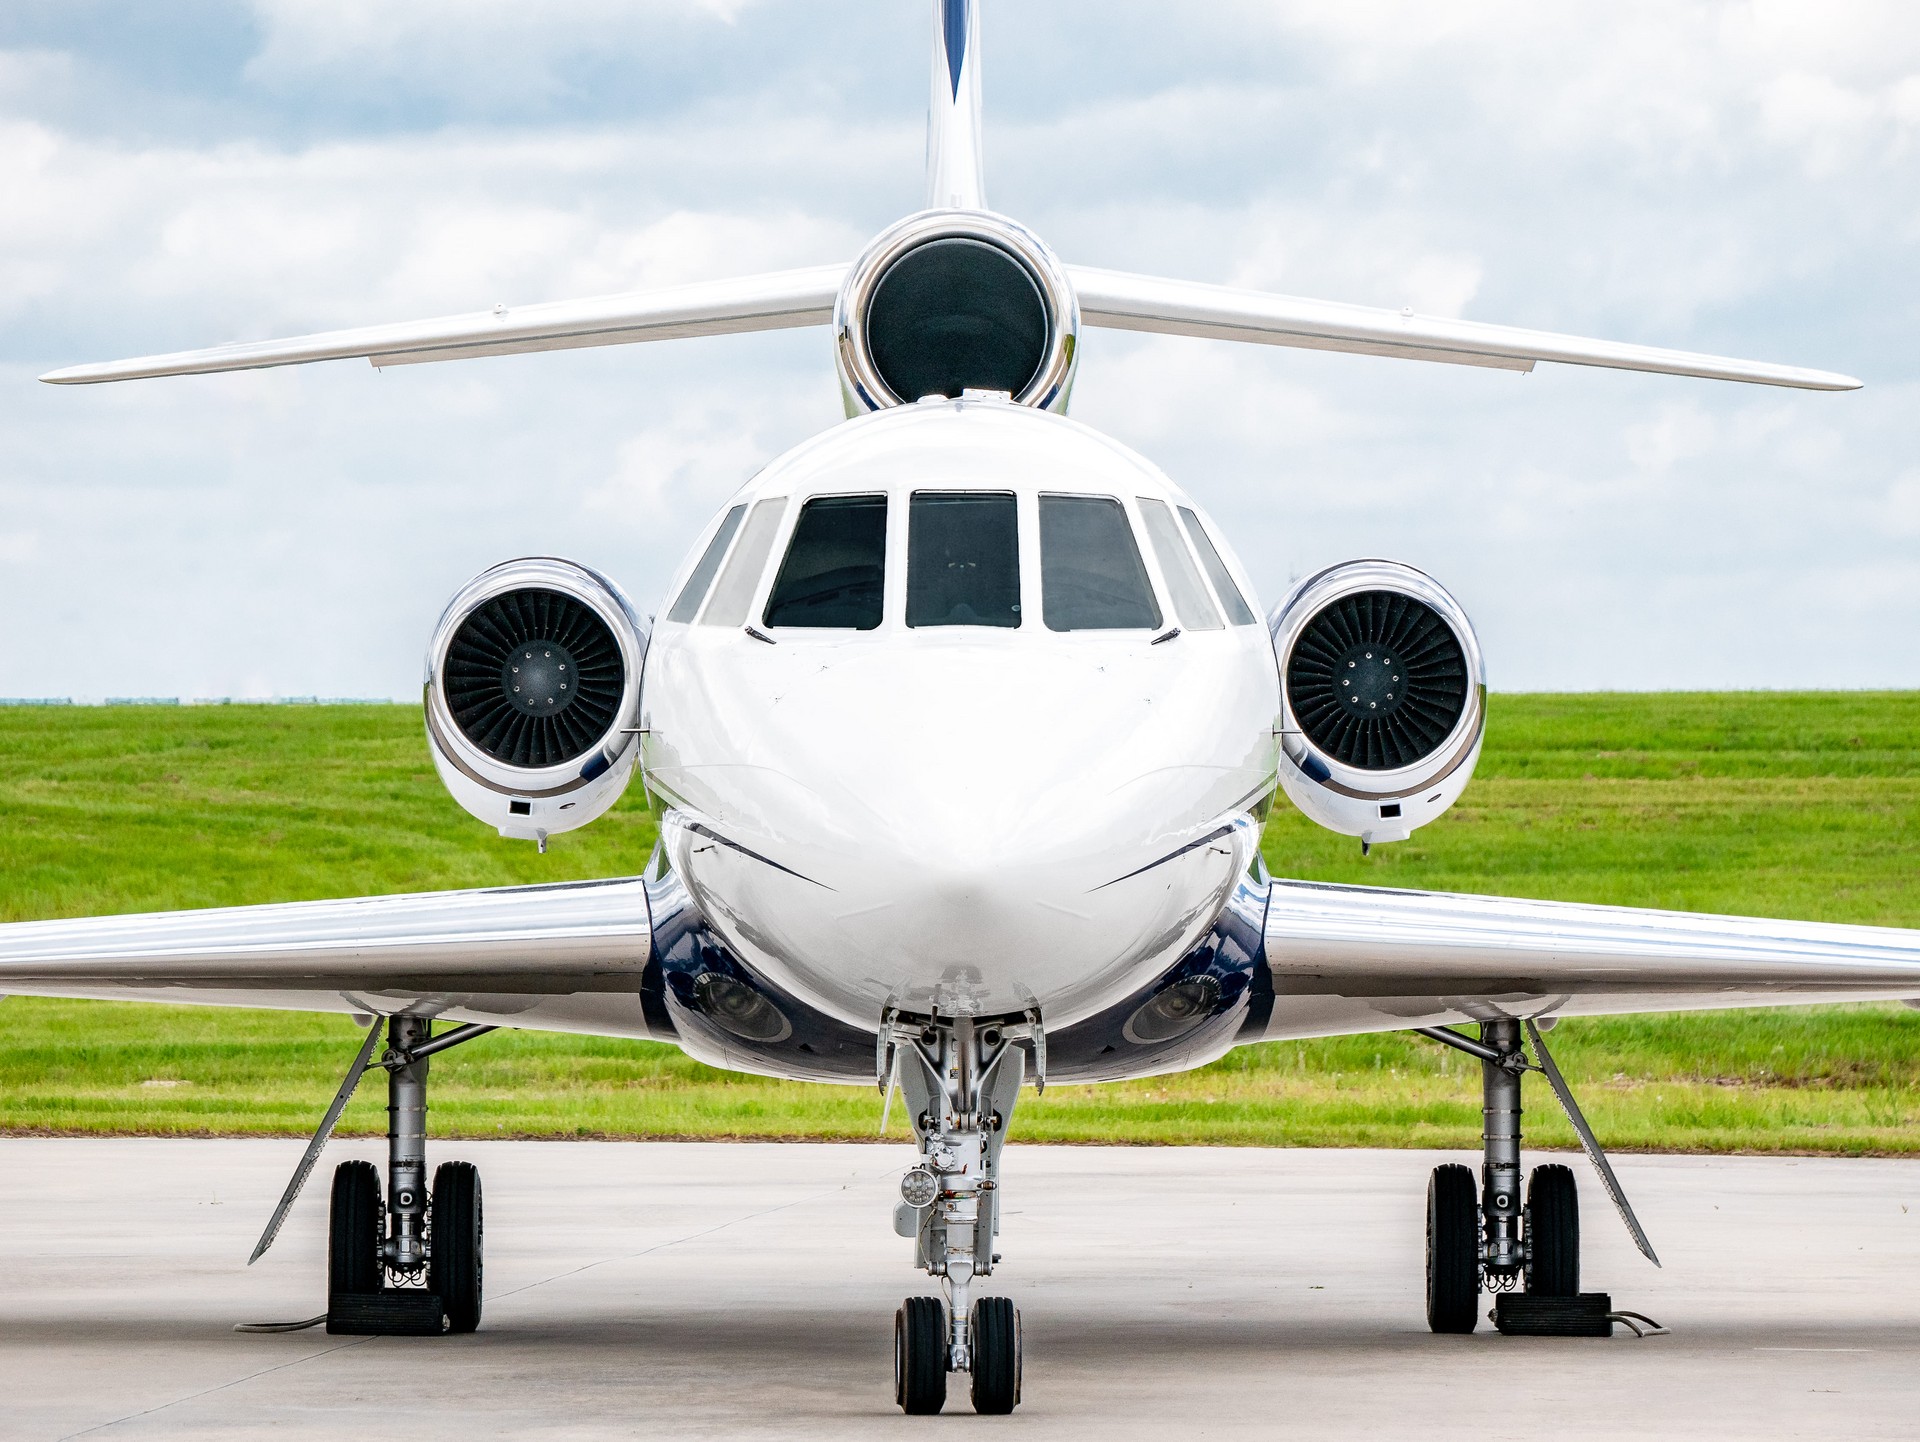 Collinsville Private Jet and Air Charter Flights